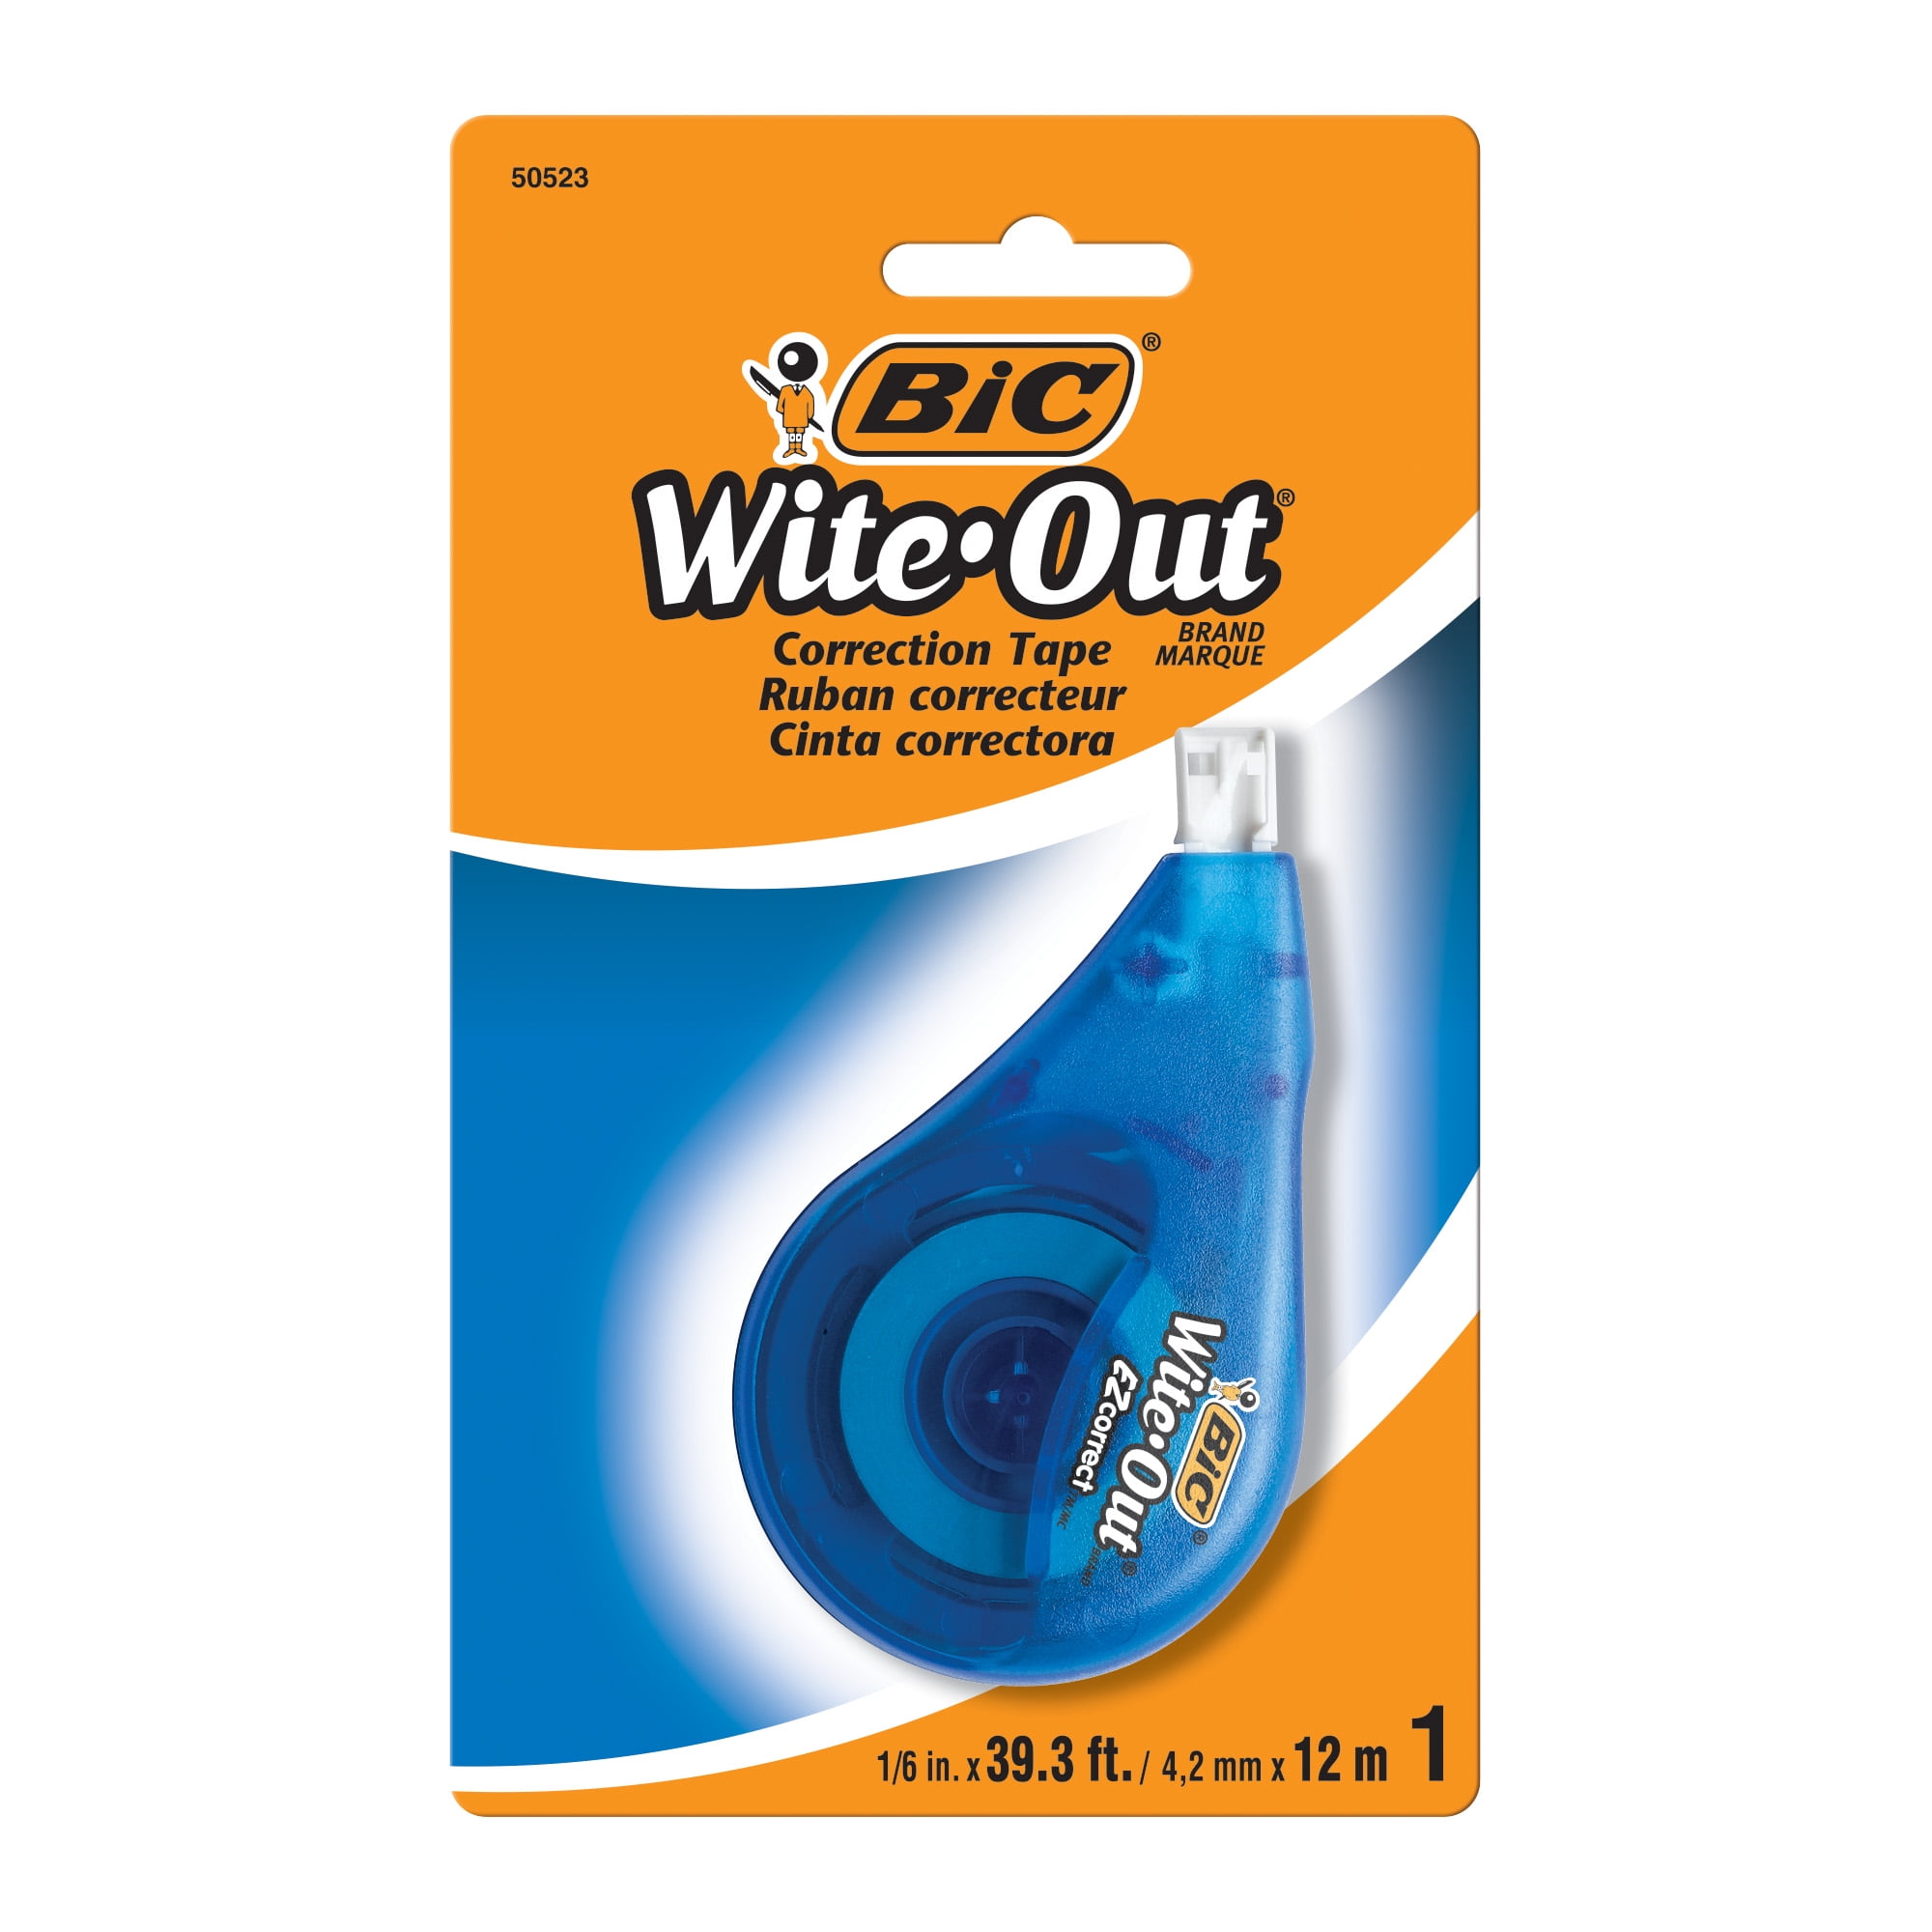 Bic Wite Out Brand Ez Correct Correction Tape Applies Dry Fast And